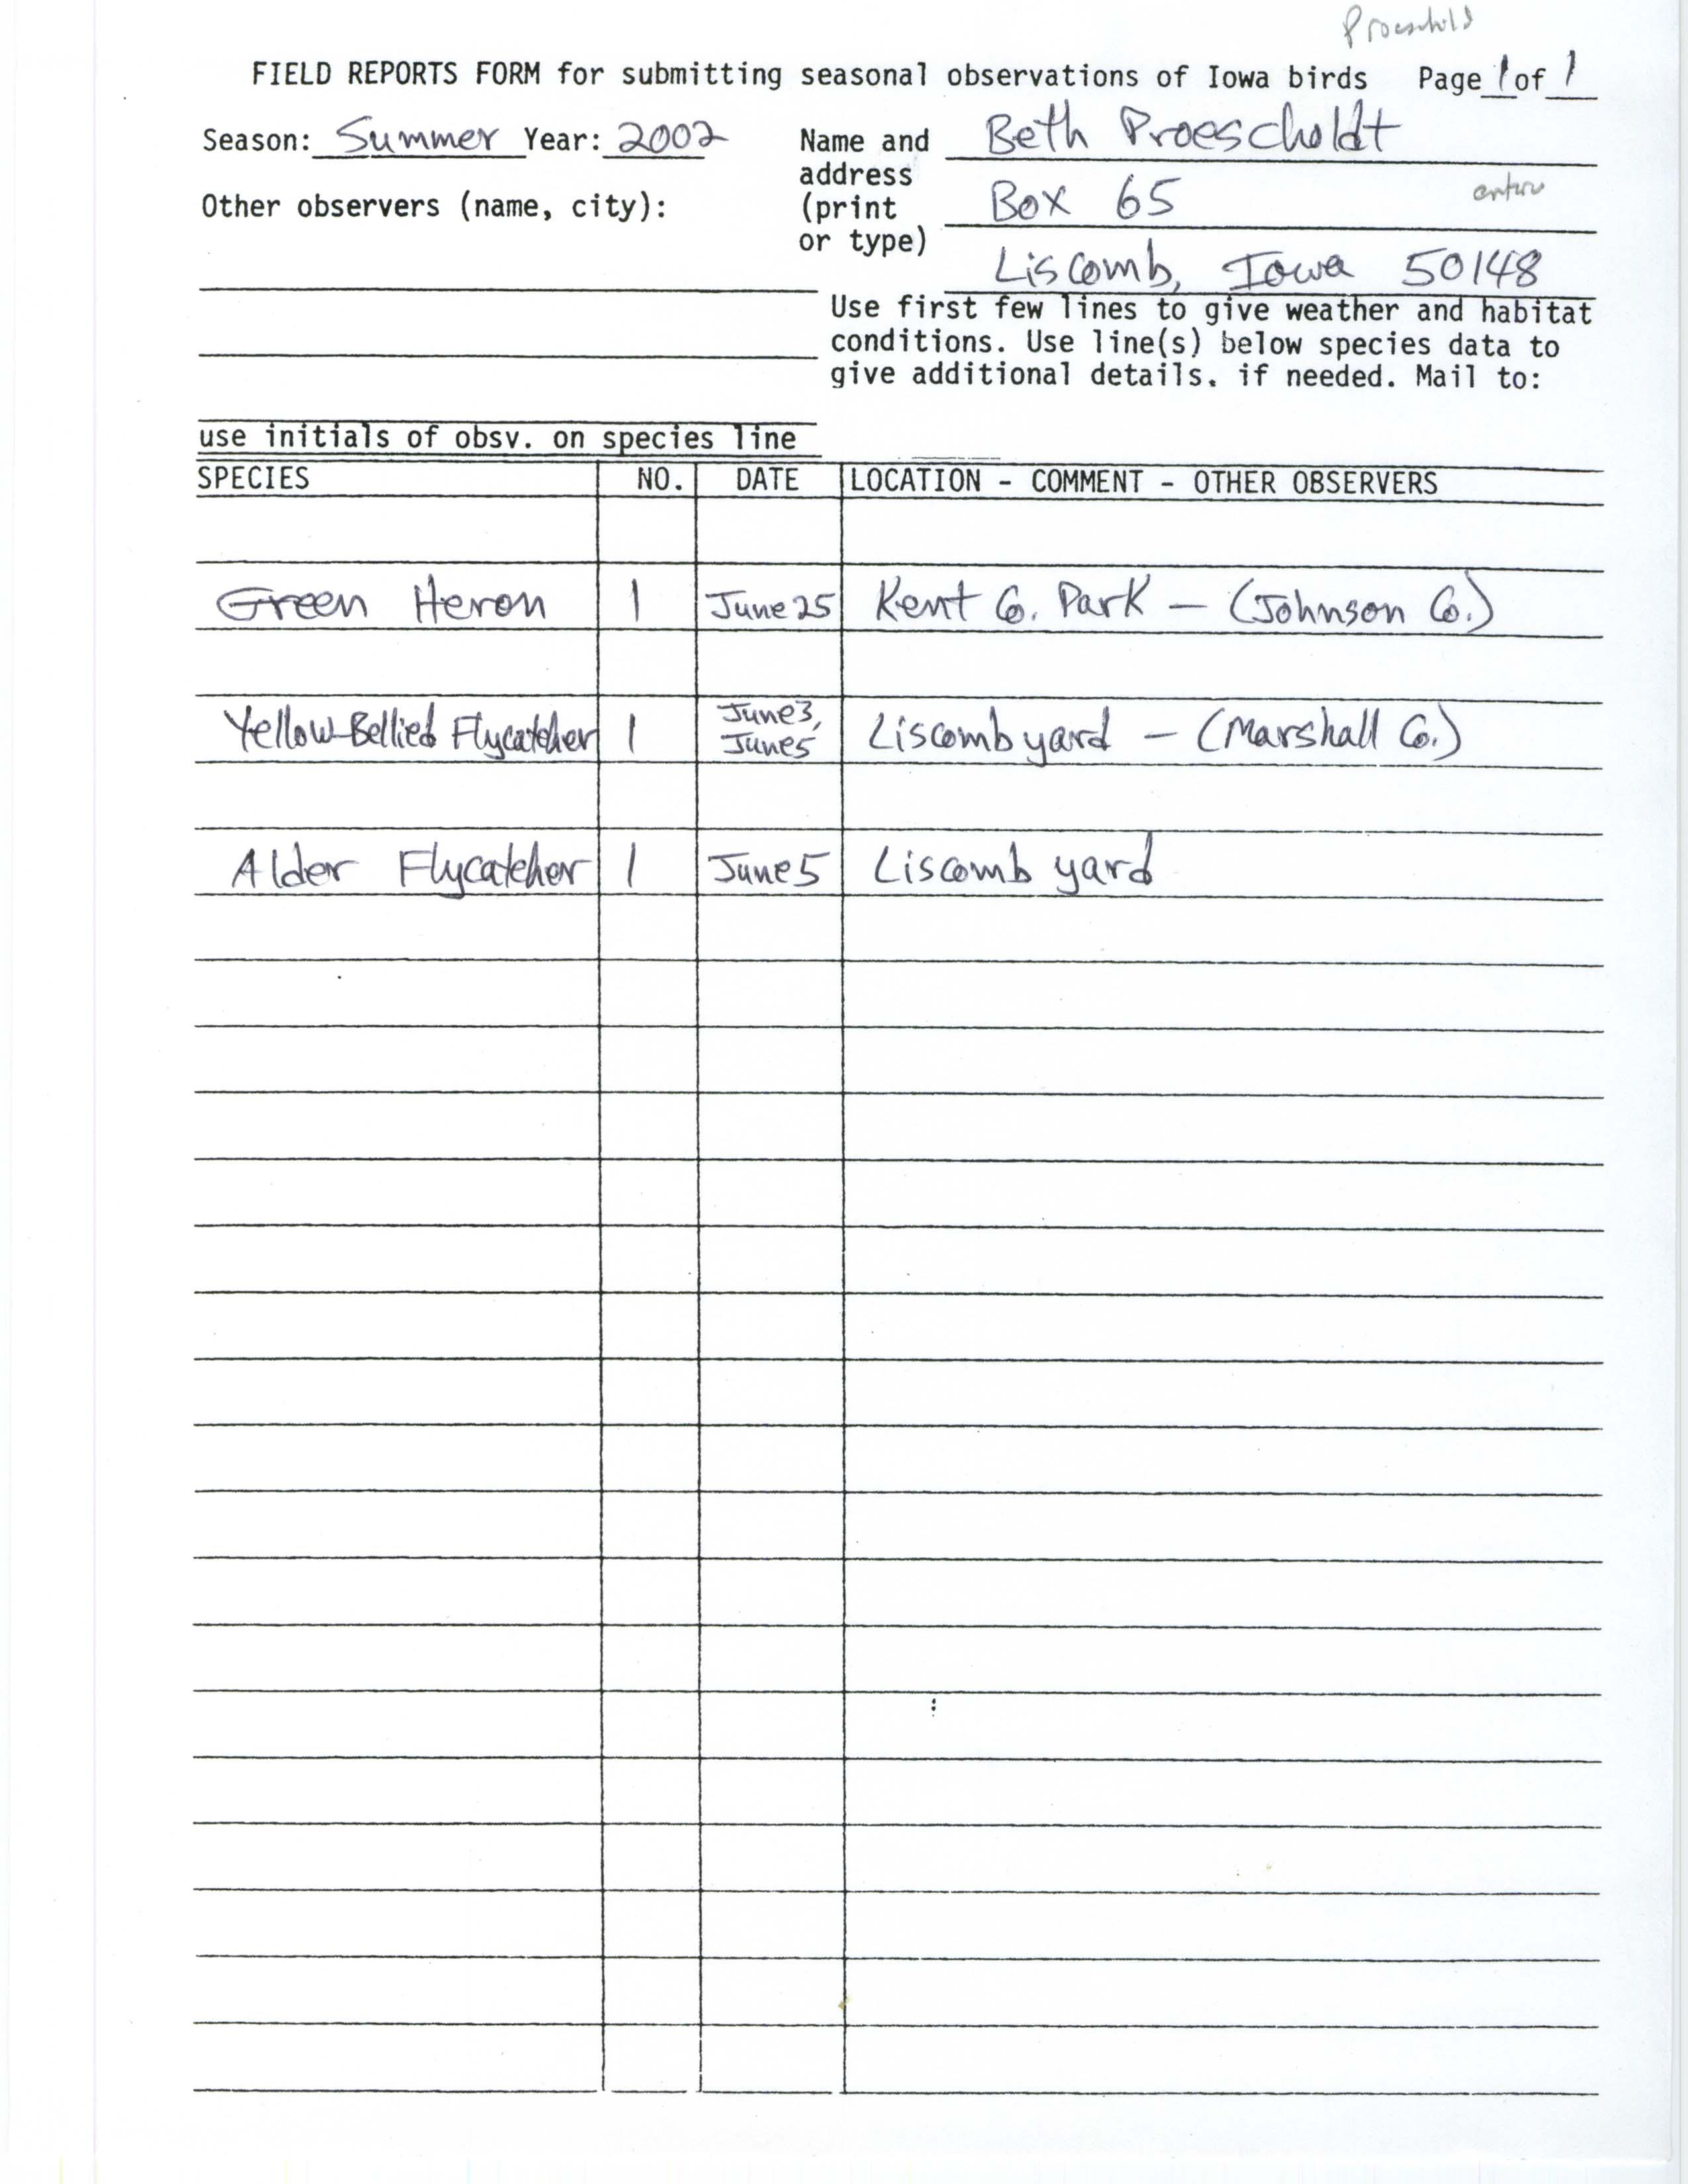 Field reports form for submitting seasonal observations of Iowa birds, Beth Proescholdt, summer 2002